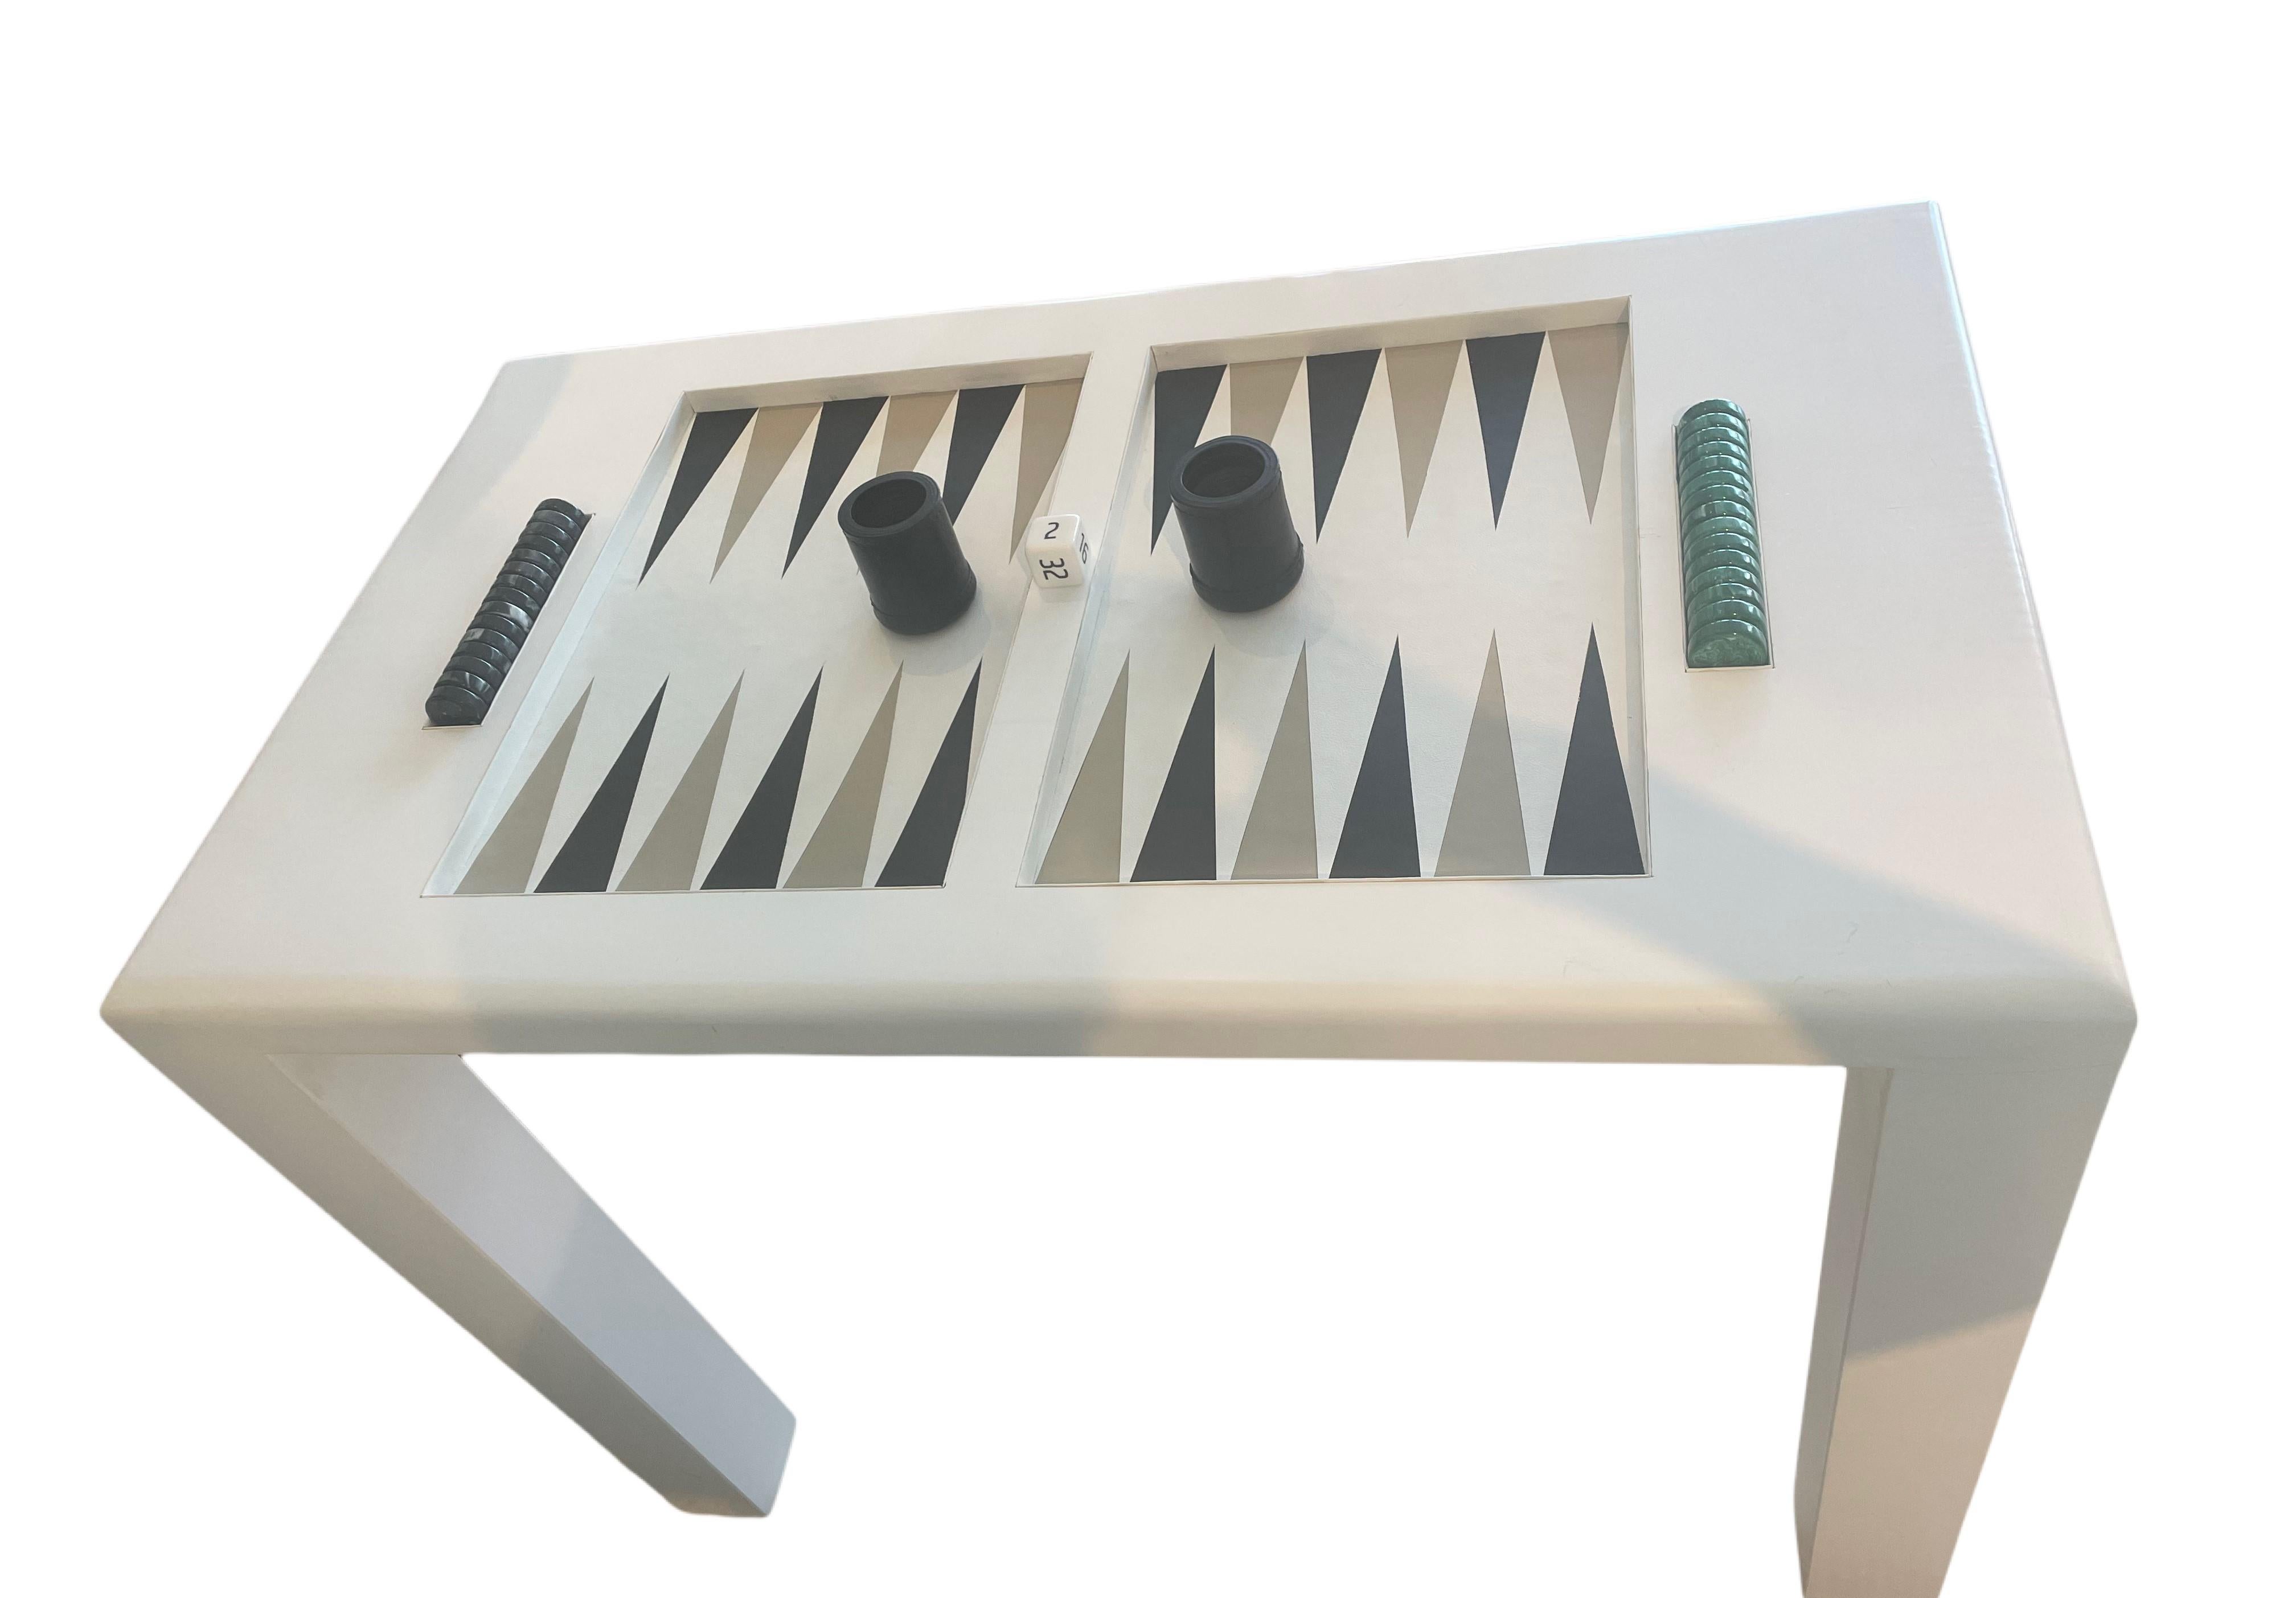 This lacquered wood backgammon table is available AND an example of a table that can be made in any size or color combination. Handcrafted with exquisite attention to detail, these backgammon tables enhance any space while elevating the